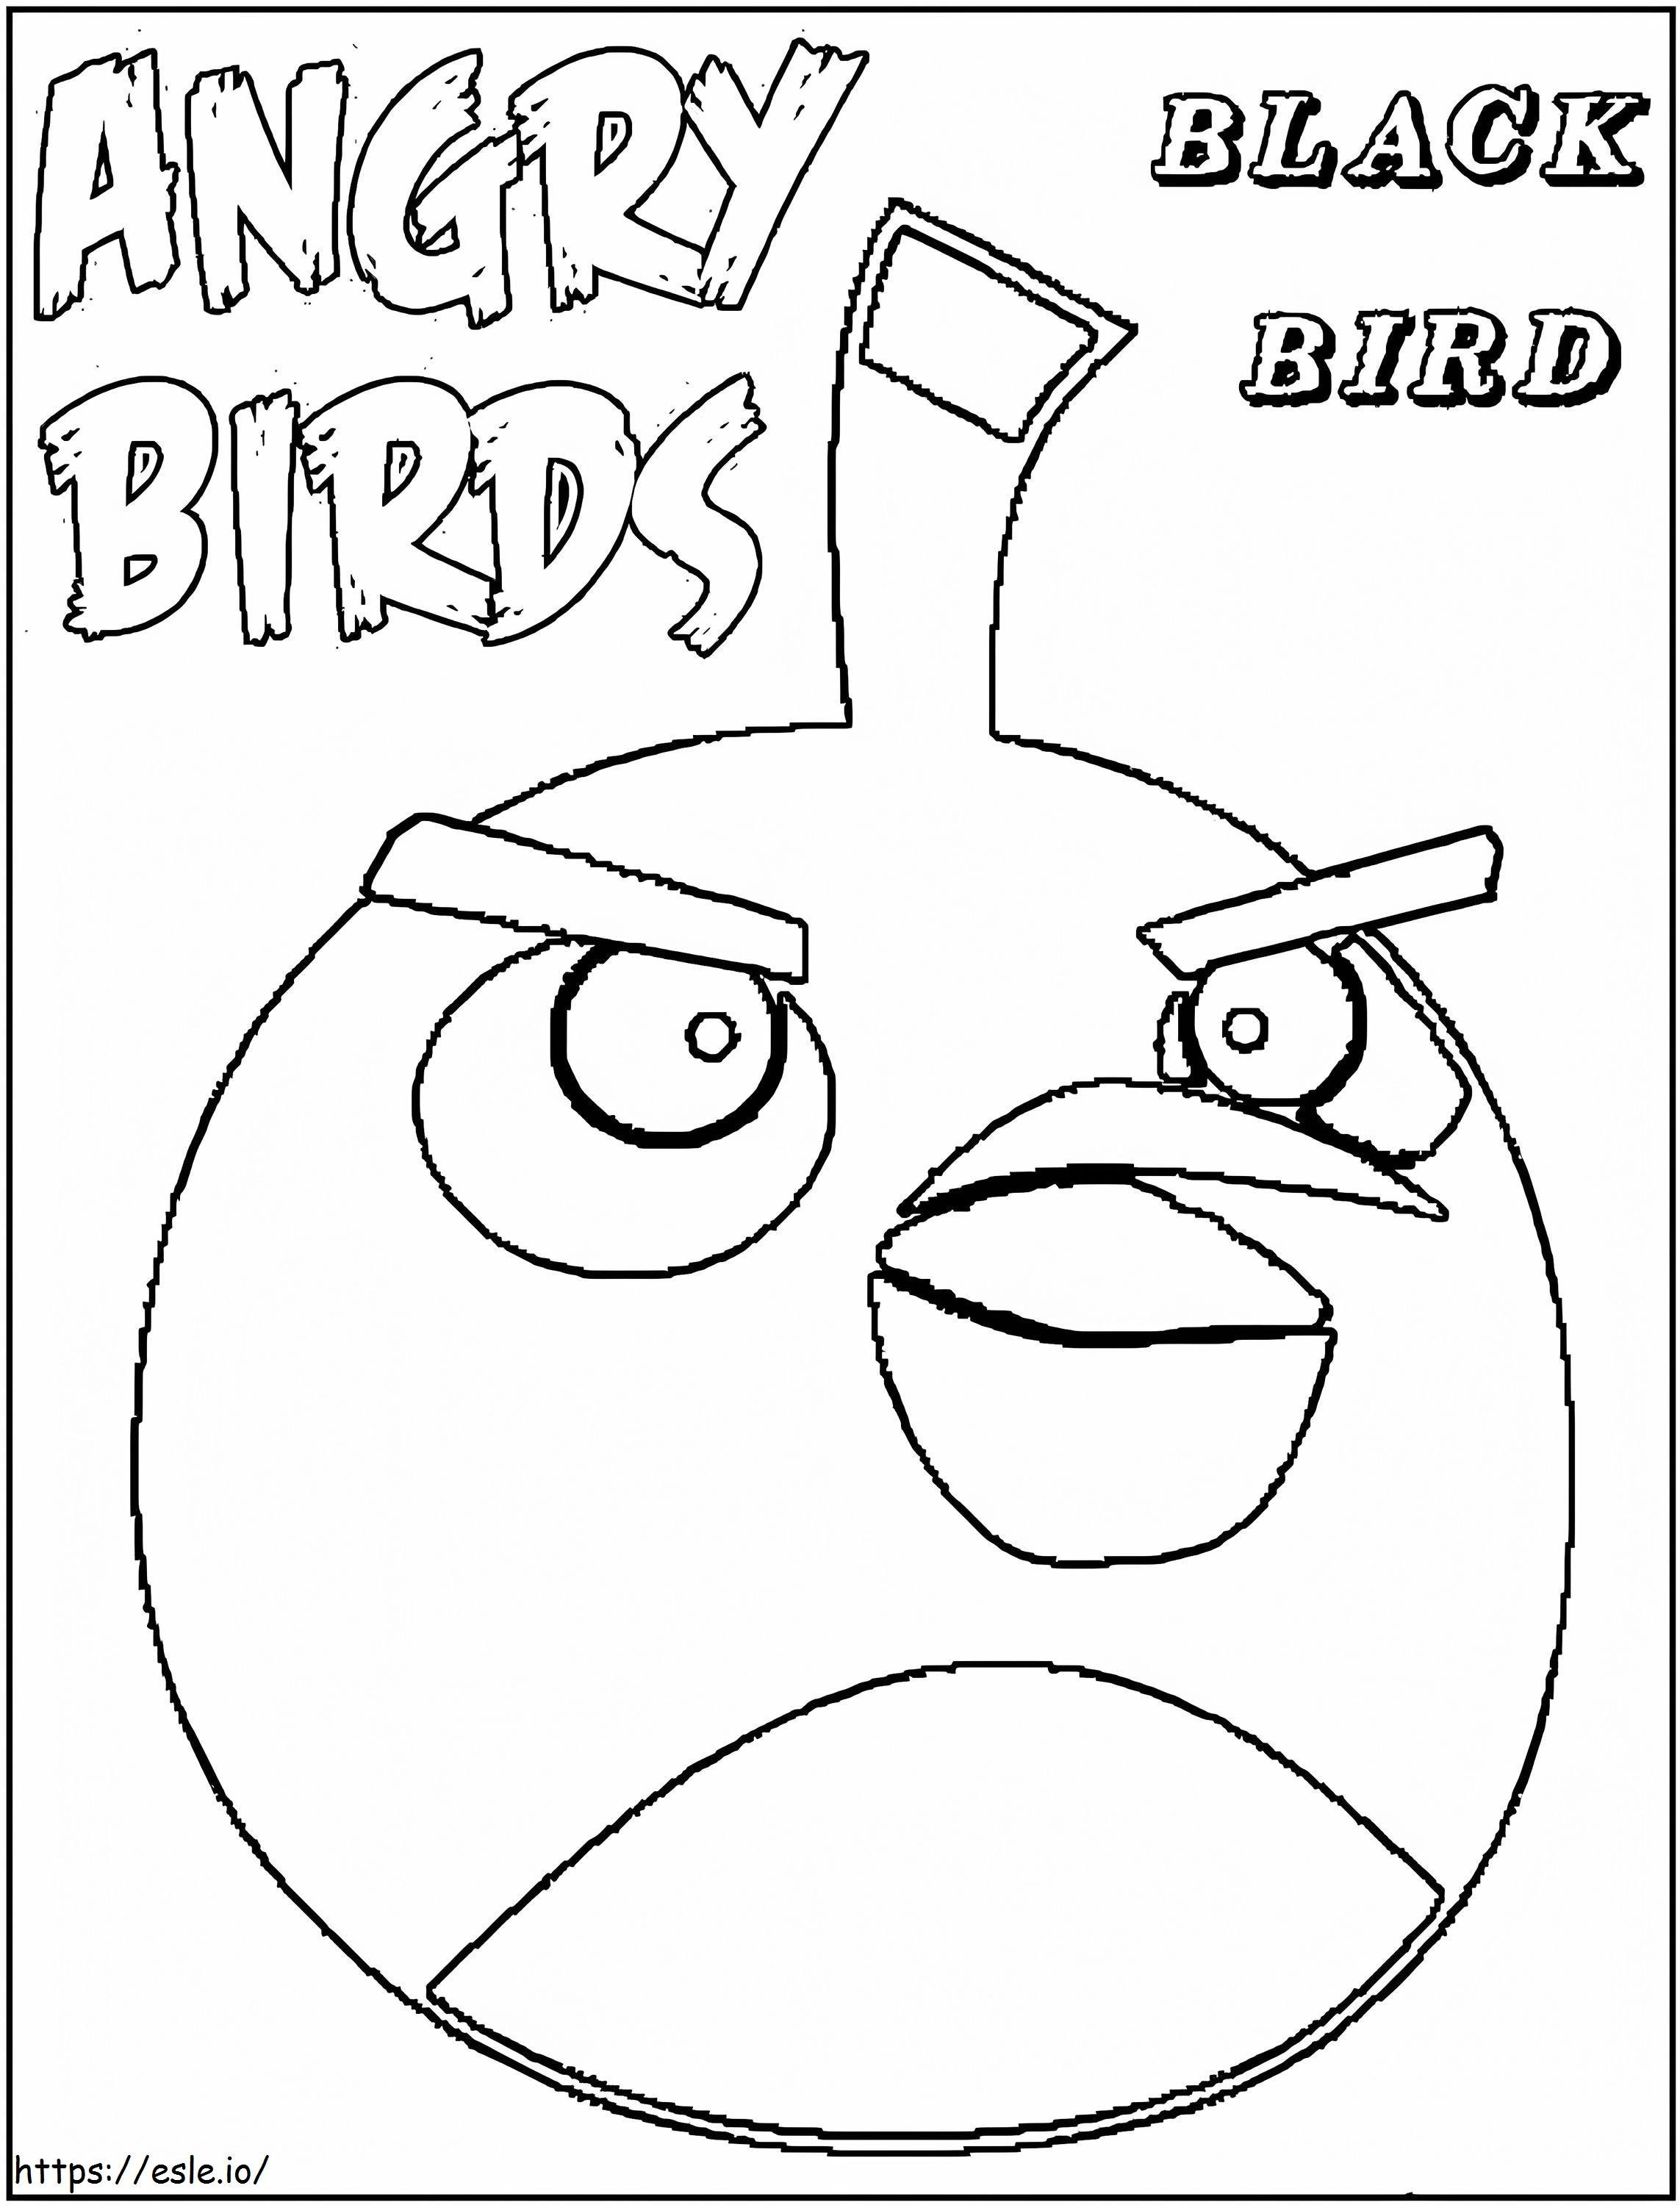 Black Bird Drawing From Angry Birds coloring page